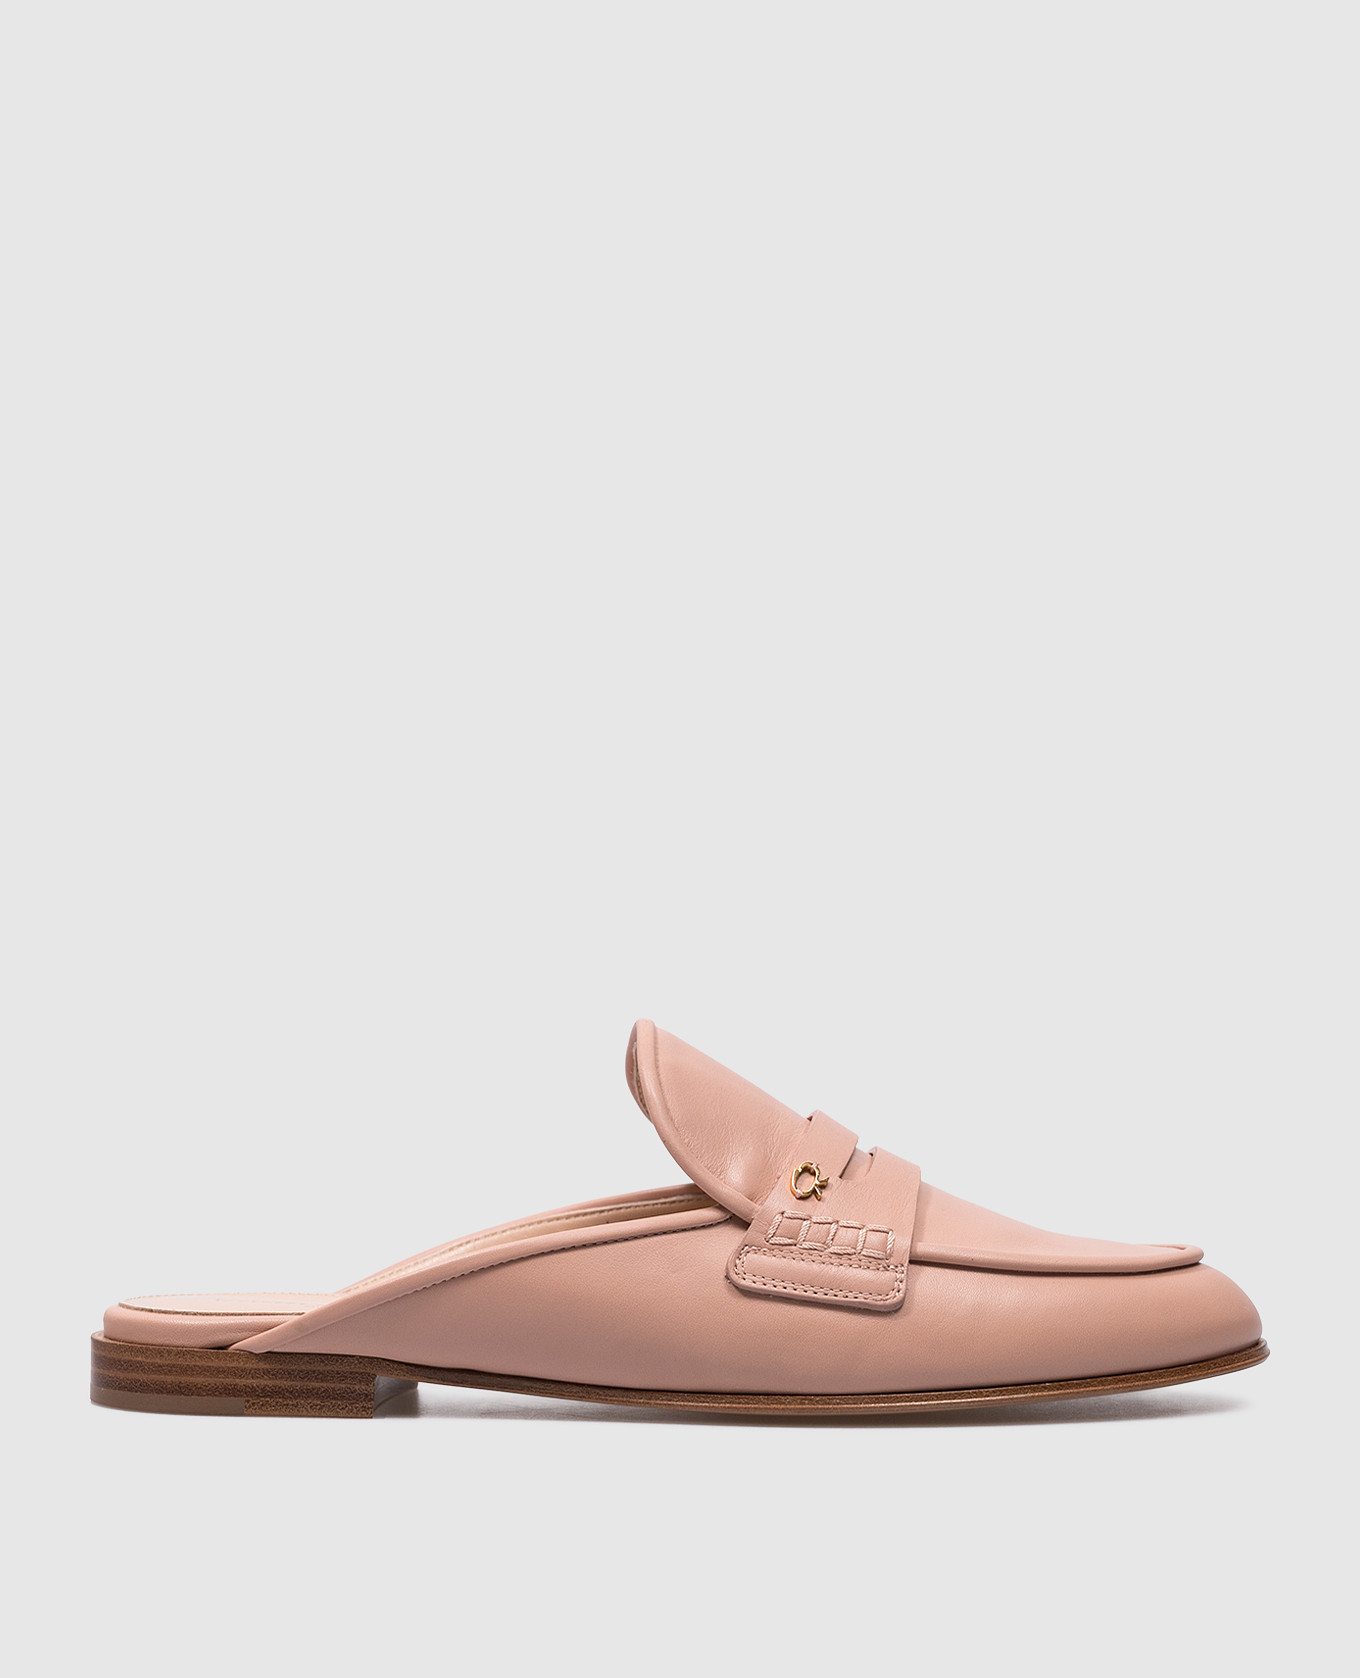 Florio pink leather mules